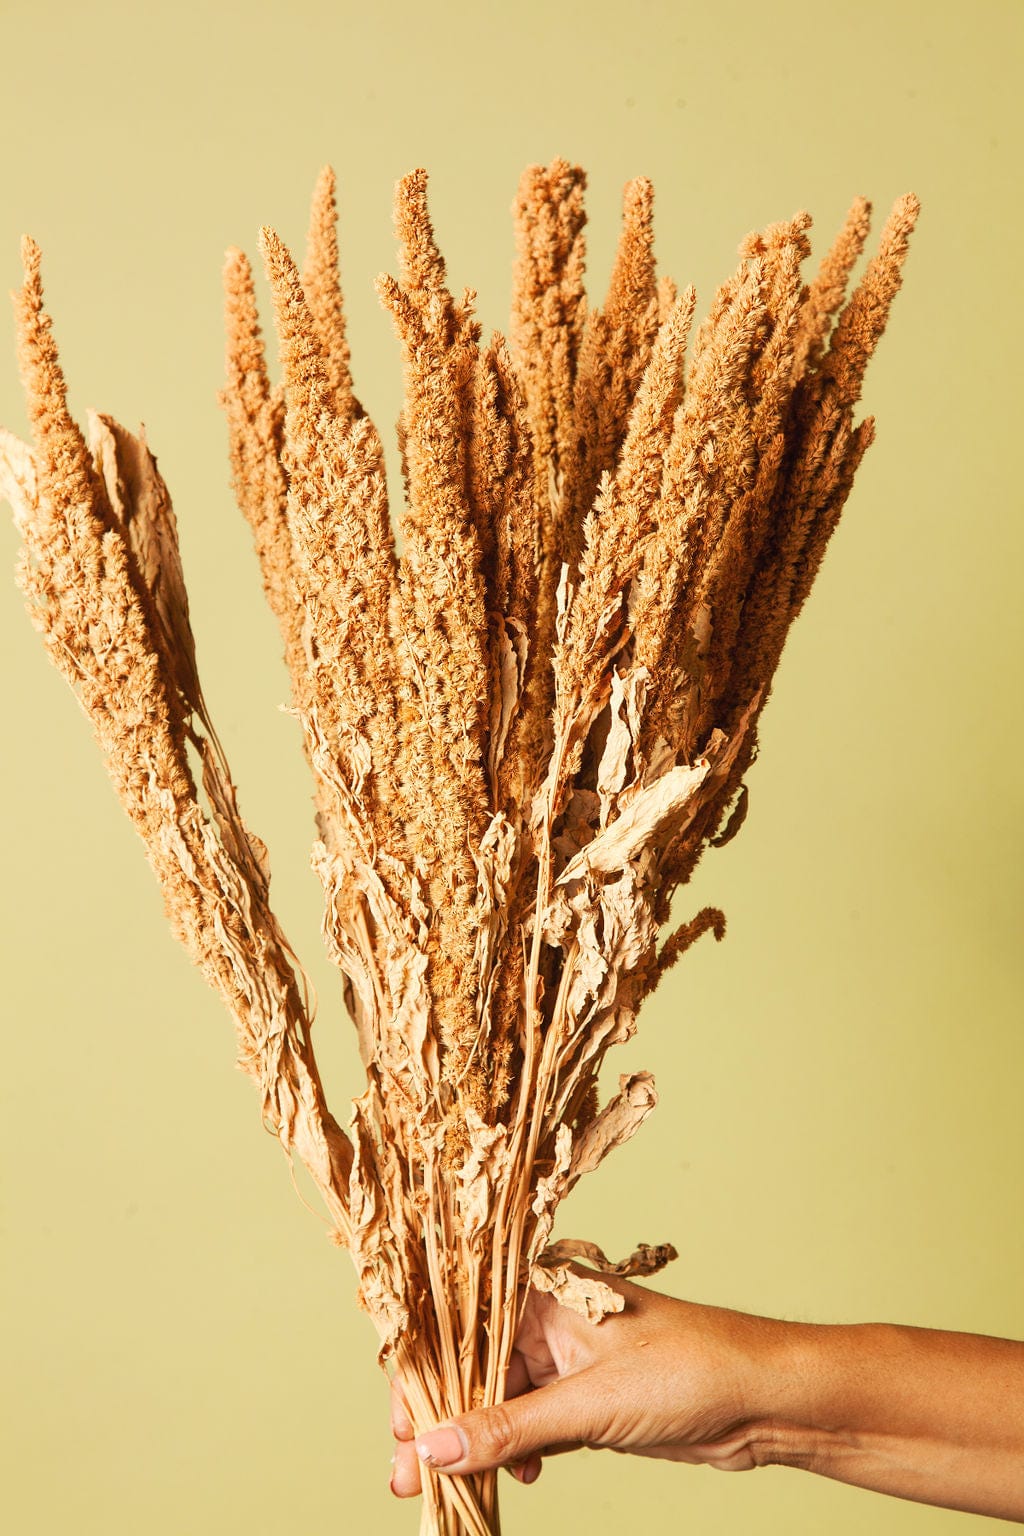 Idlewild Floral Co. Bunches Coral Amaranth